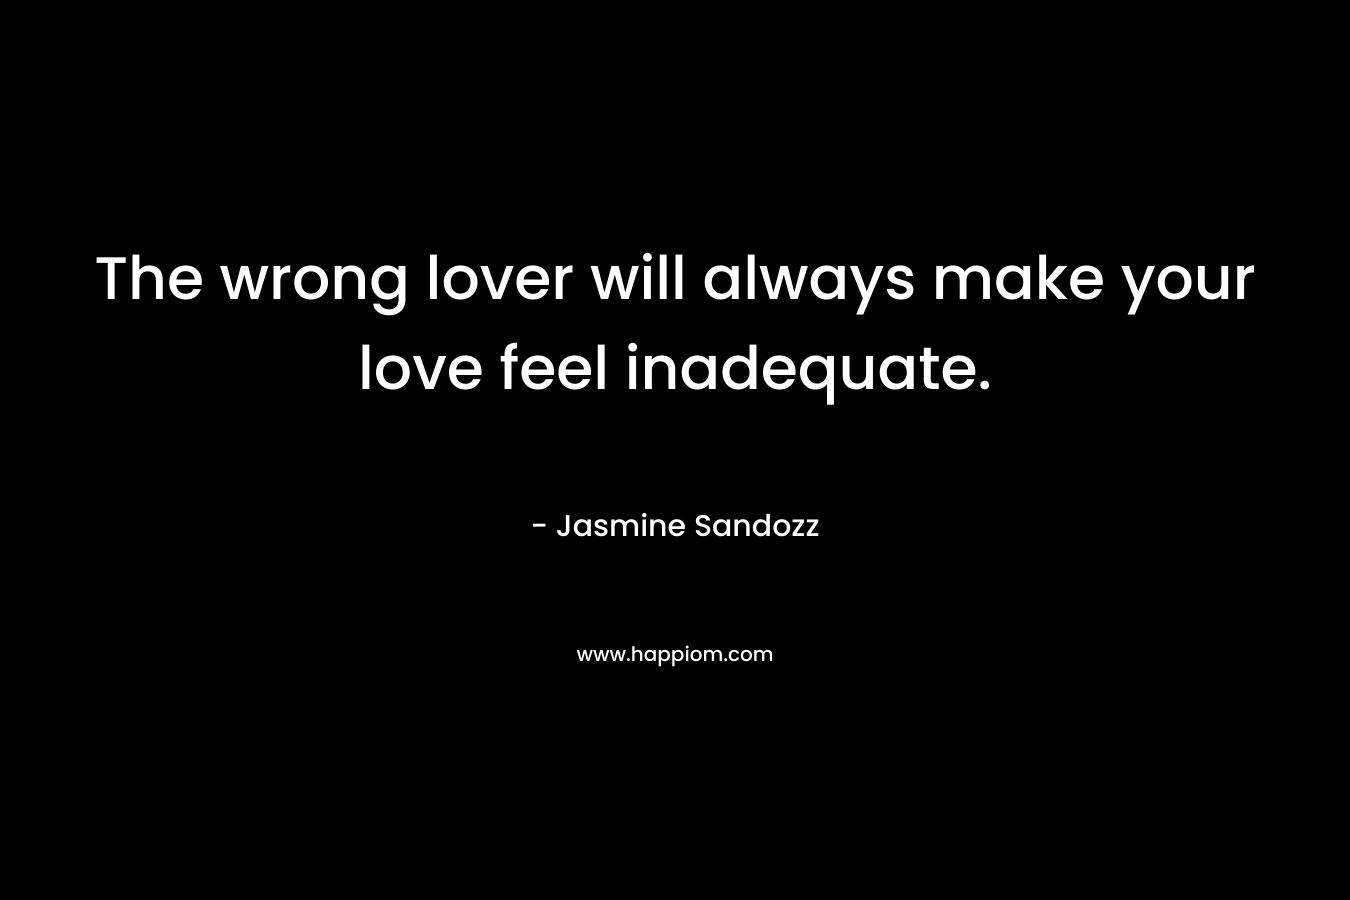 The wrong lover will always make your love feel inadequate.